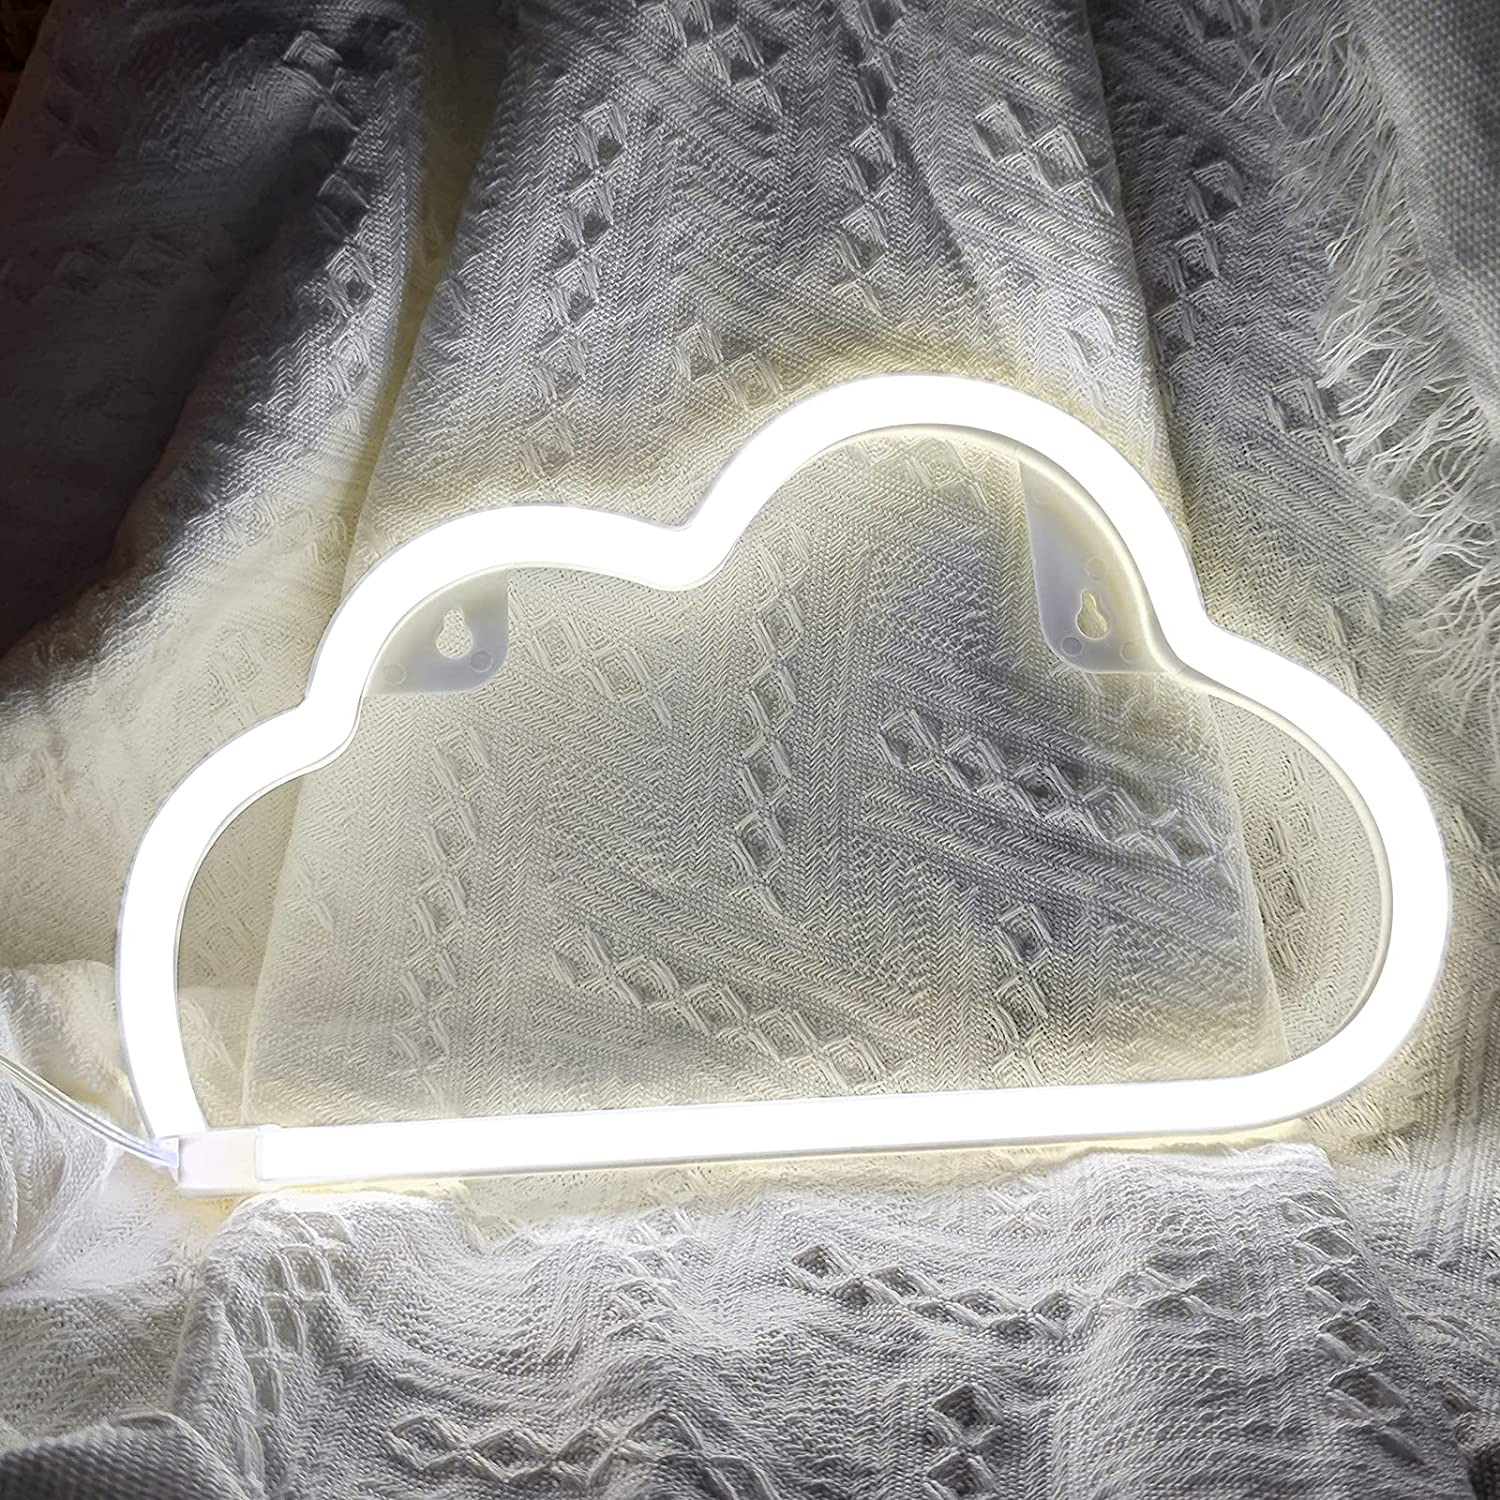  LED Cloud Neon Light for Wall Decor, Battery or USB Powered